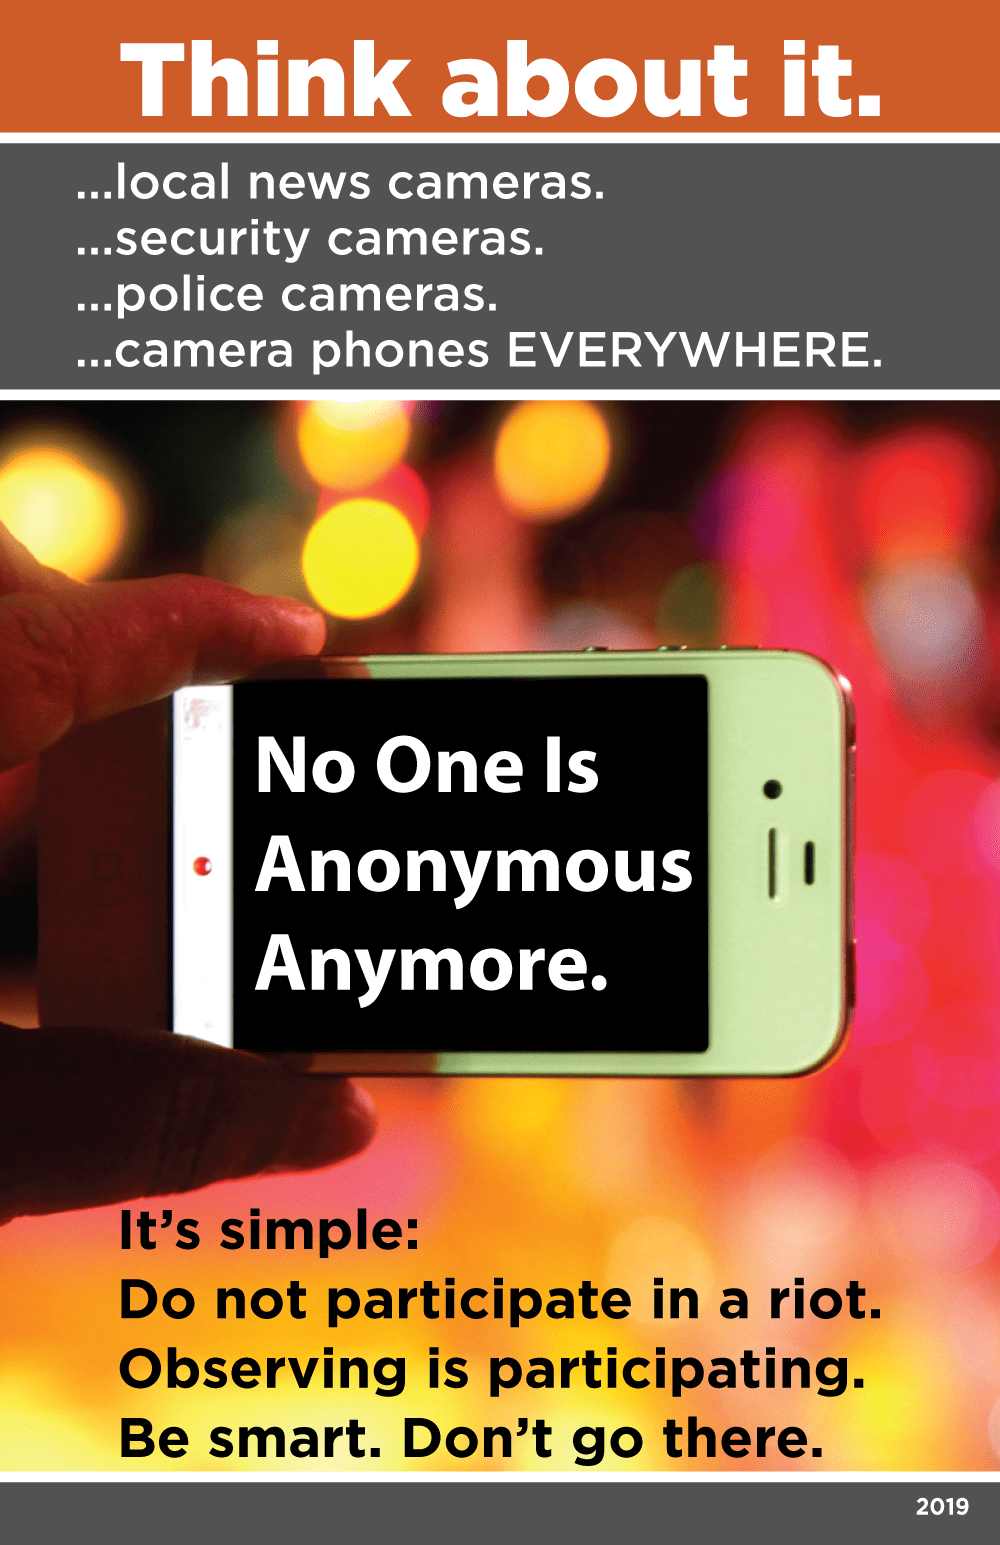 From top to bottom: White text on orange background saying, “Think about it.” White text on gray background saying, “…local news cameras. …security cameras. …police cameras. …camera phones everywhere.” Images of fingers holding a smart phone with a blurred red, yellow and orange background. White text on the black screen of the smart phone saying, “No one is anonymous anymore.” Black text over the same blurred background saying, “It’s simple: Do not participate in a riot. Observing is participating. Be Smart. Don’t go there.”